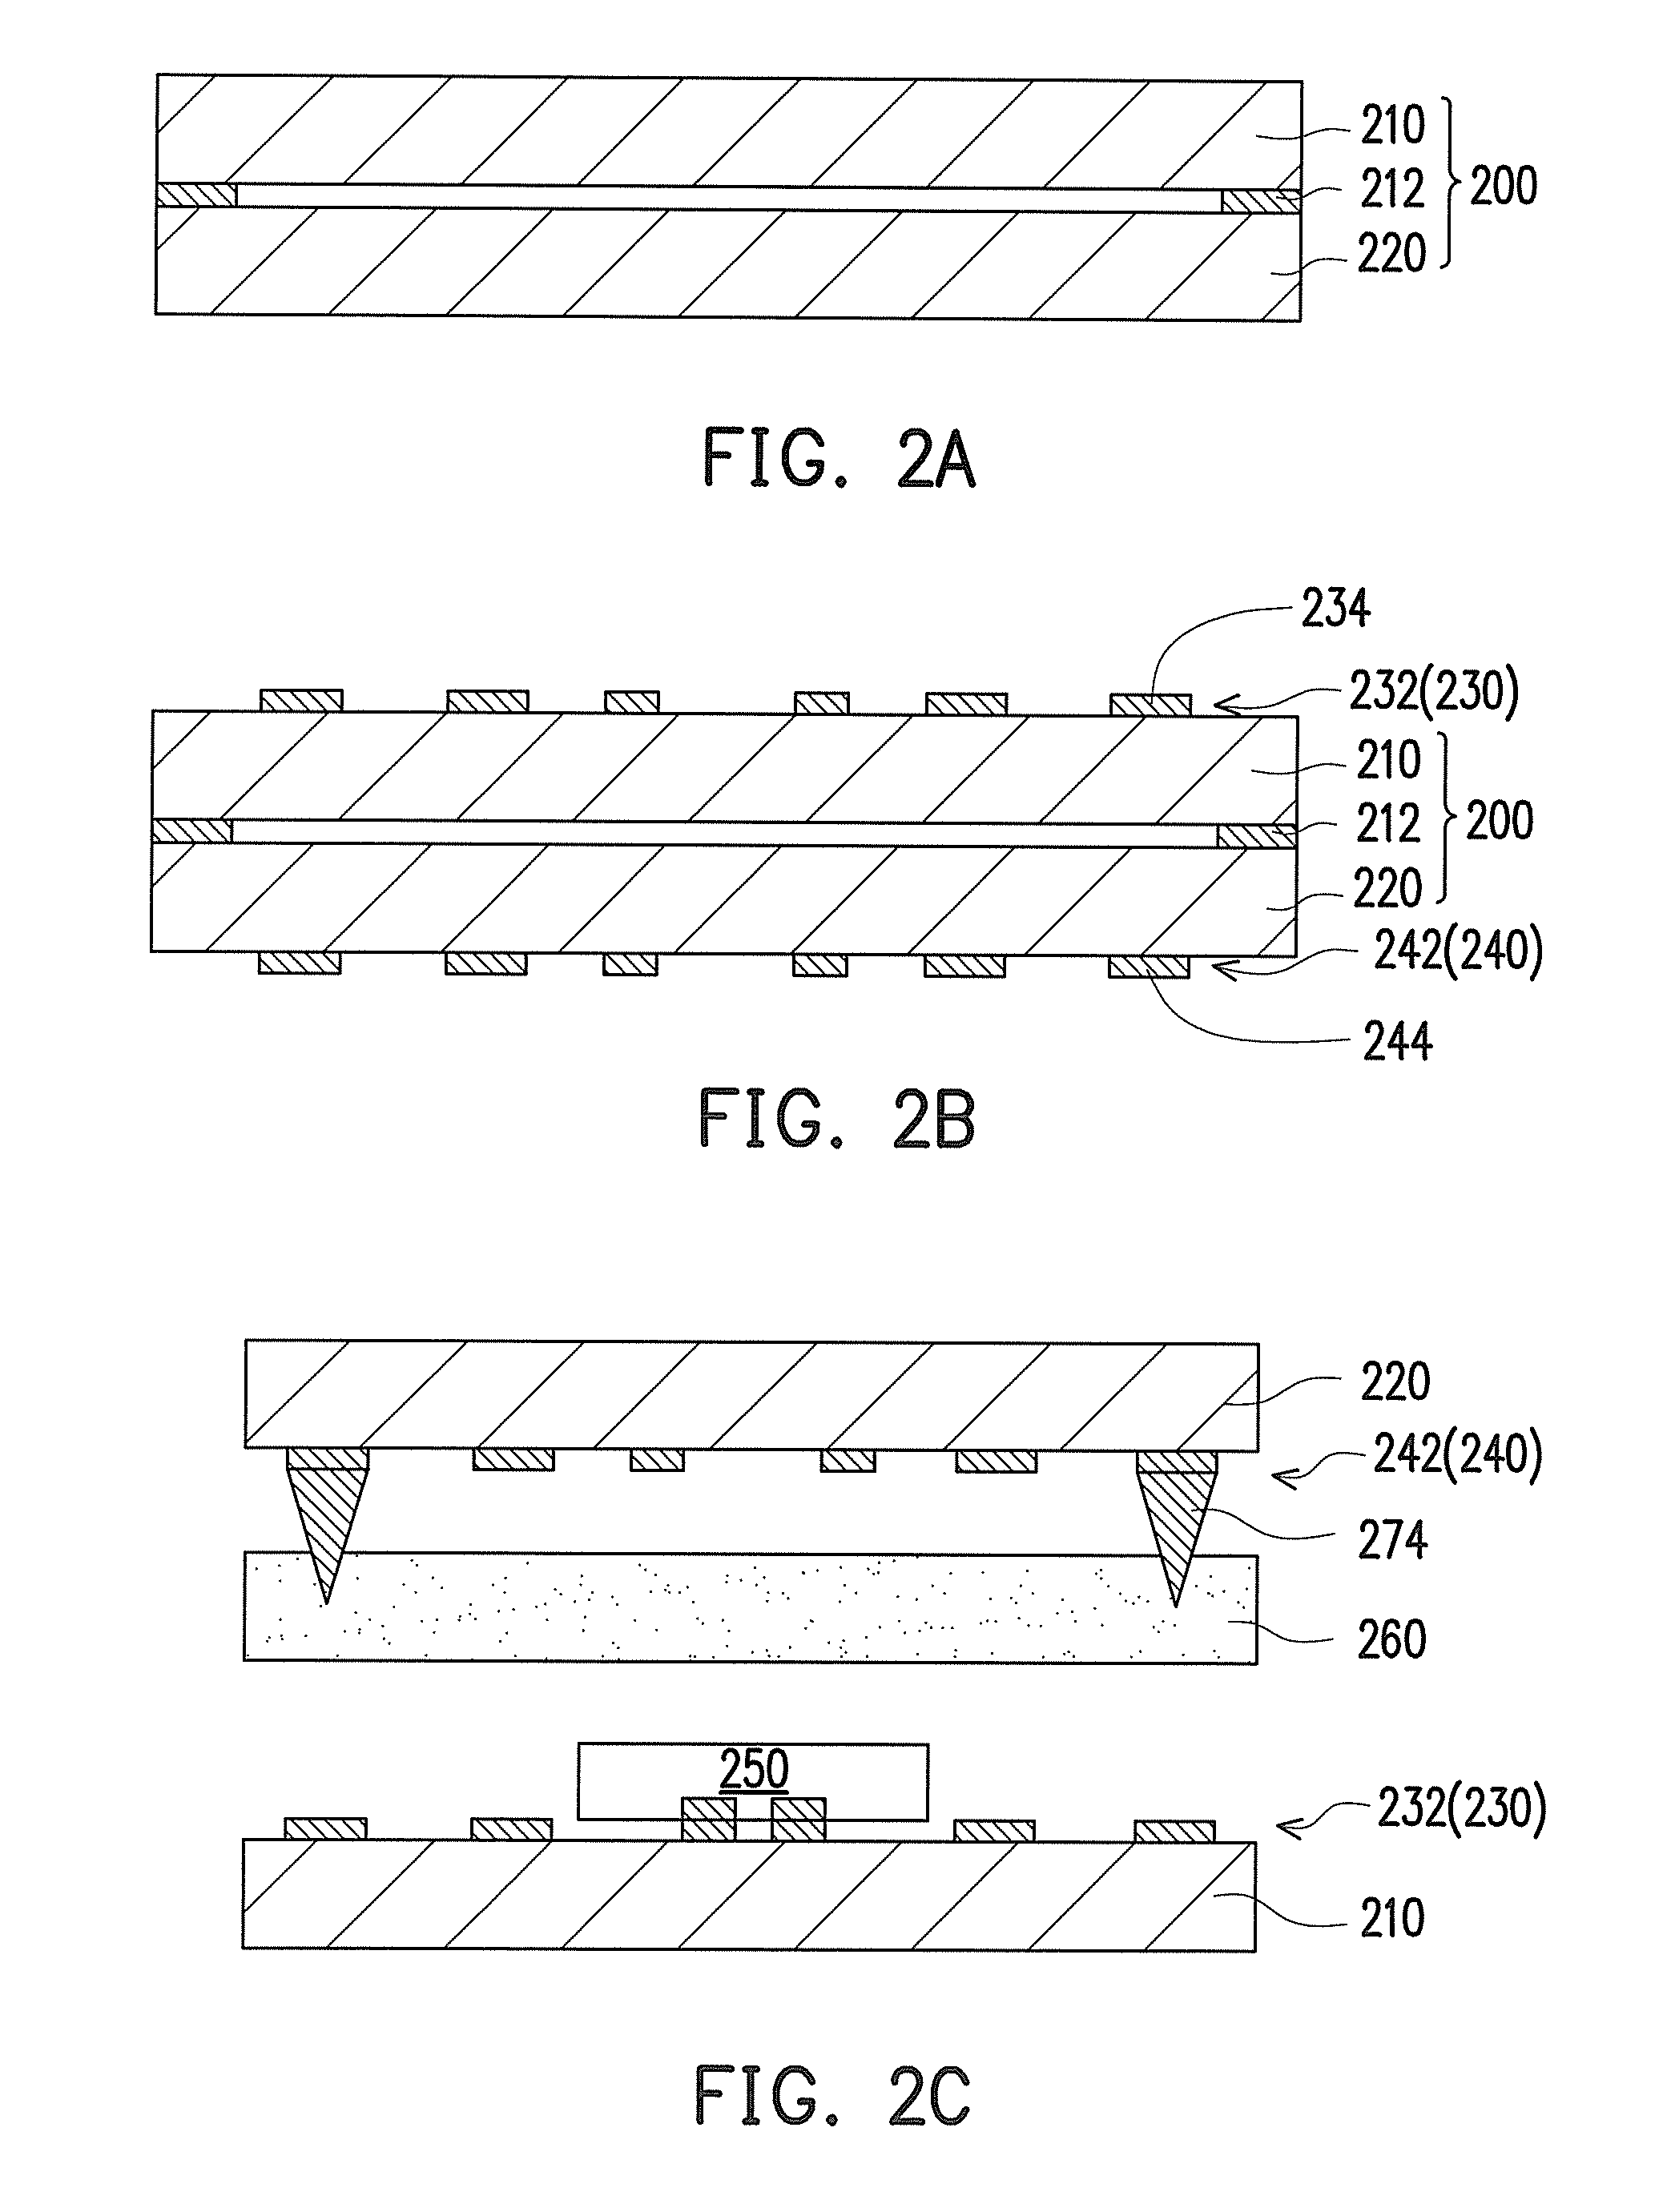 Fabricating method of embedded package structure